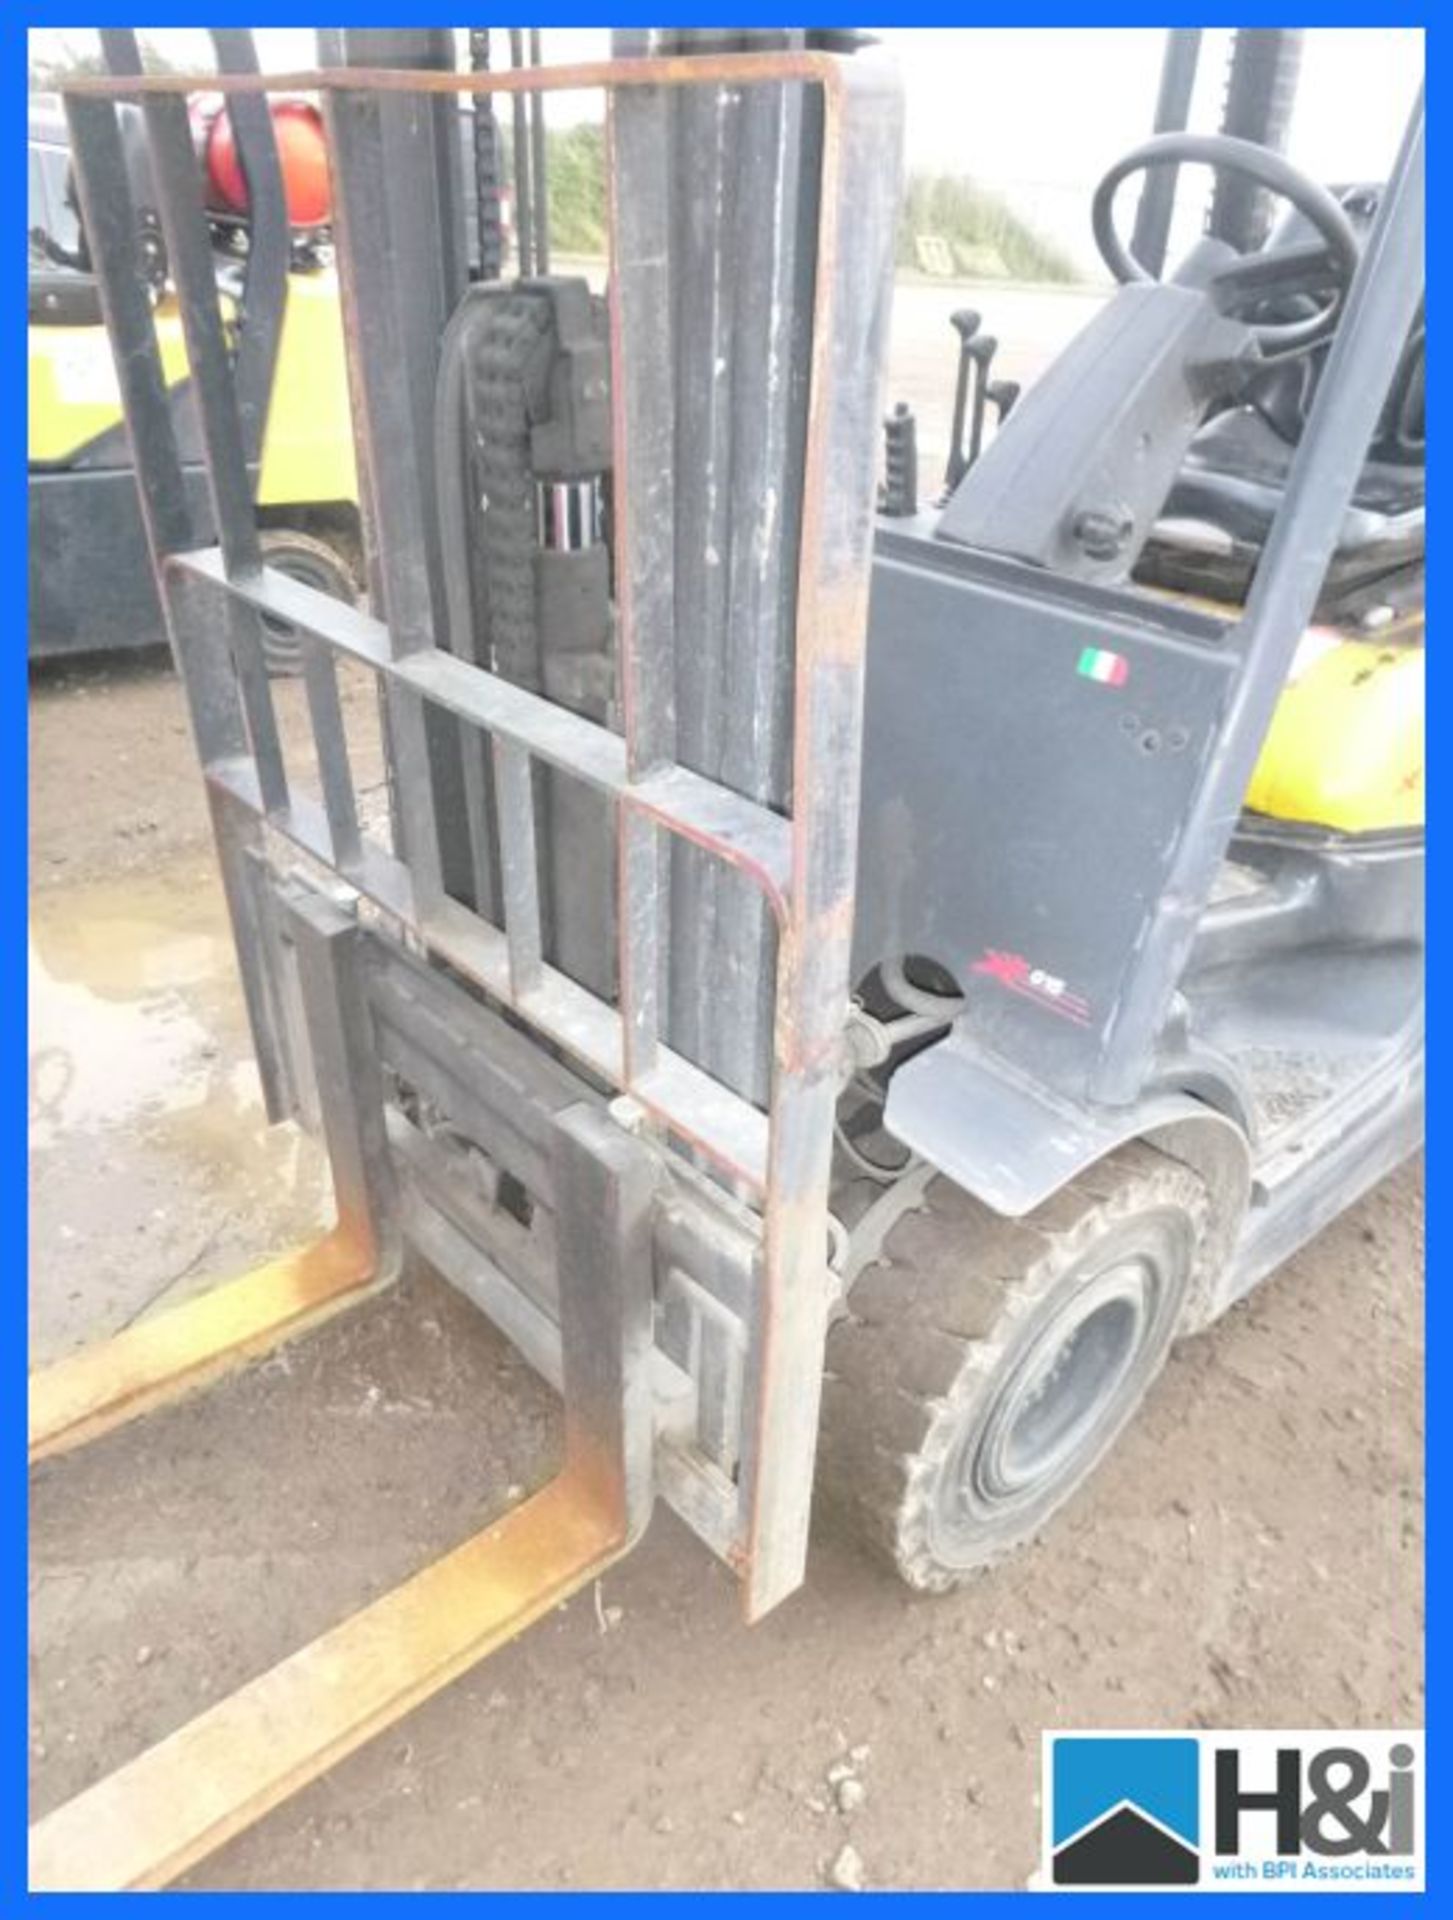 OM XG15. 1500 kg Gas forklift. Side shift. Double mast. HOURS 9370.4. In working order. Viewing - Image 5 of 7